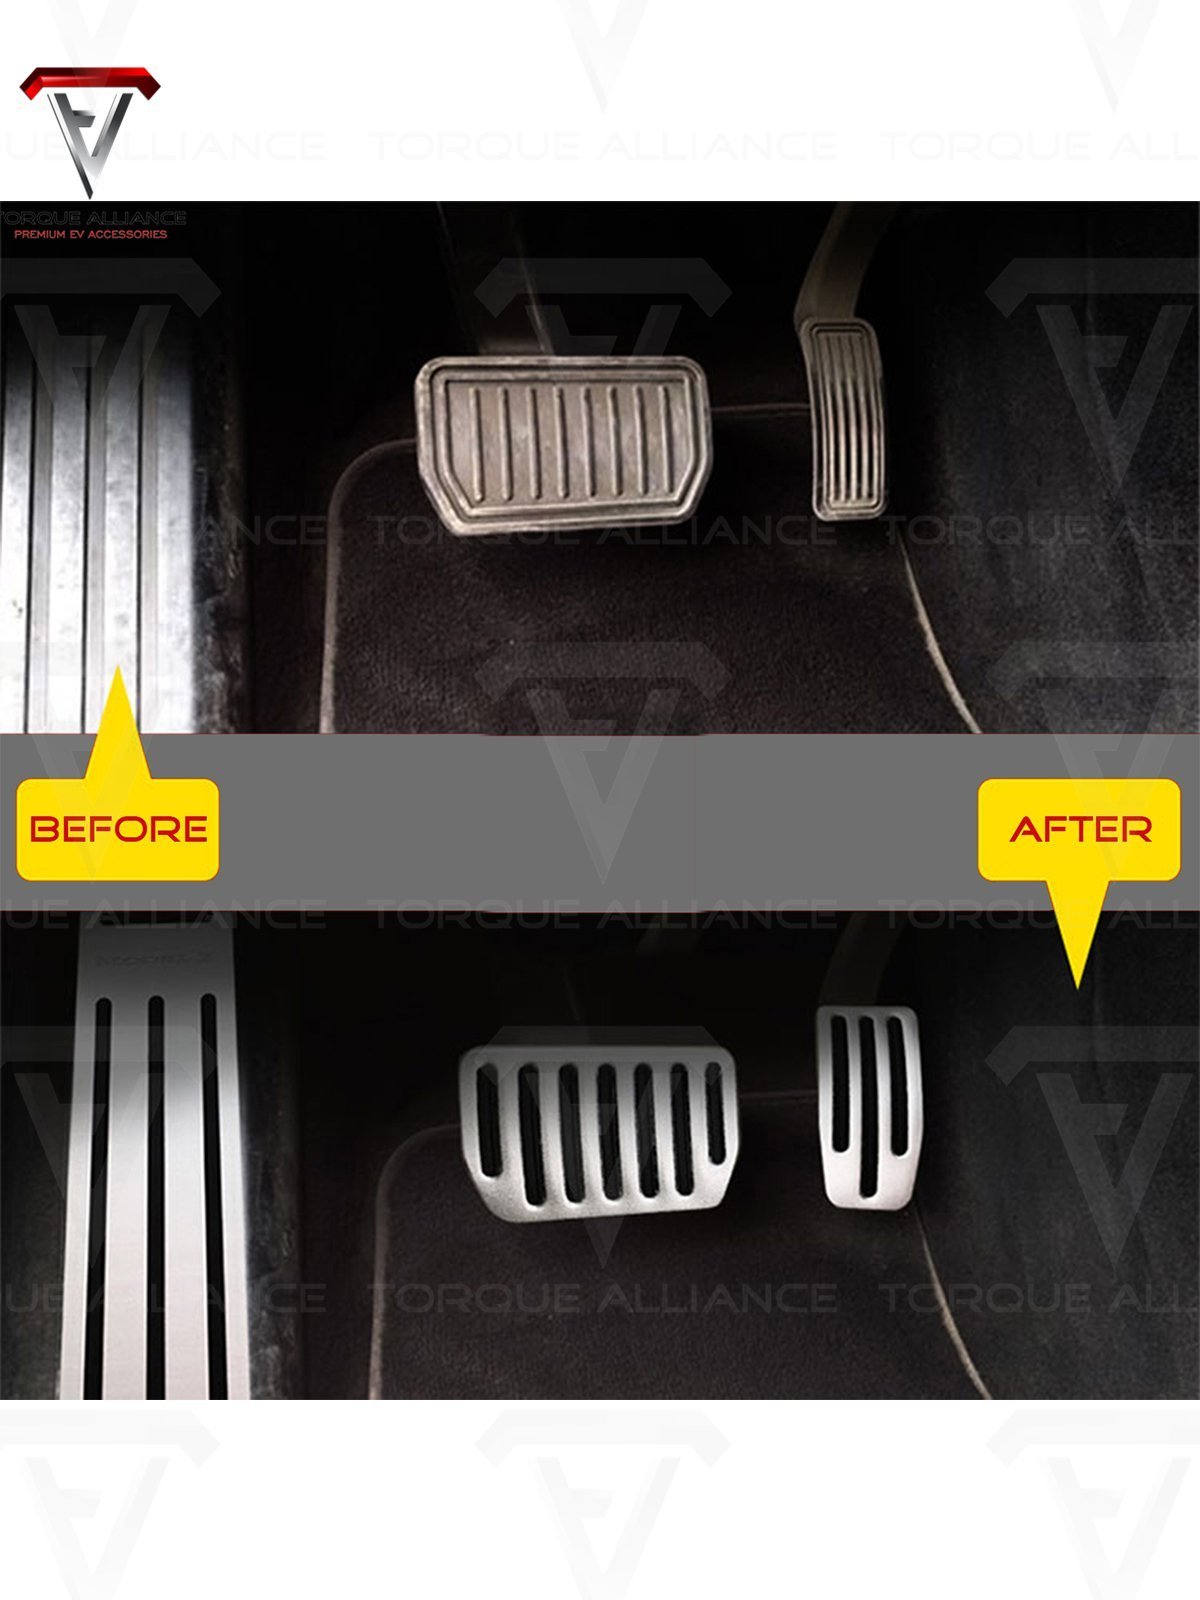 Model X/S: Performance Pedal Set (Stainless Steel) - Torque Alliance